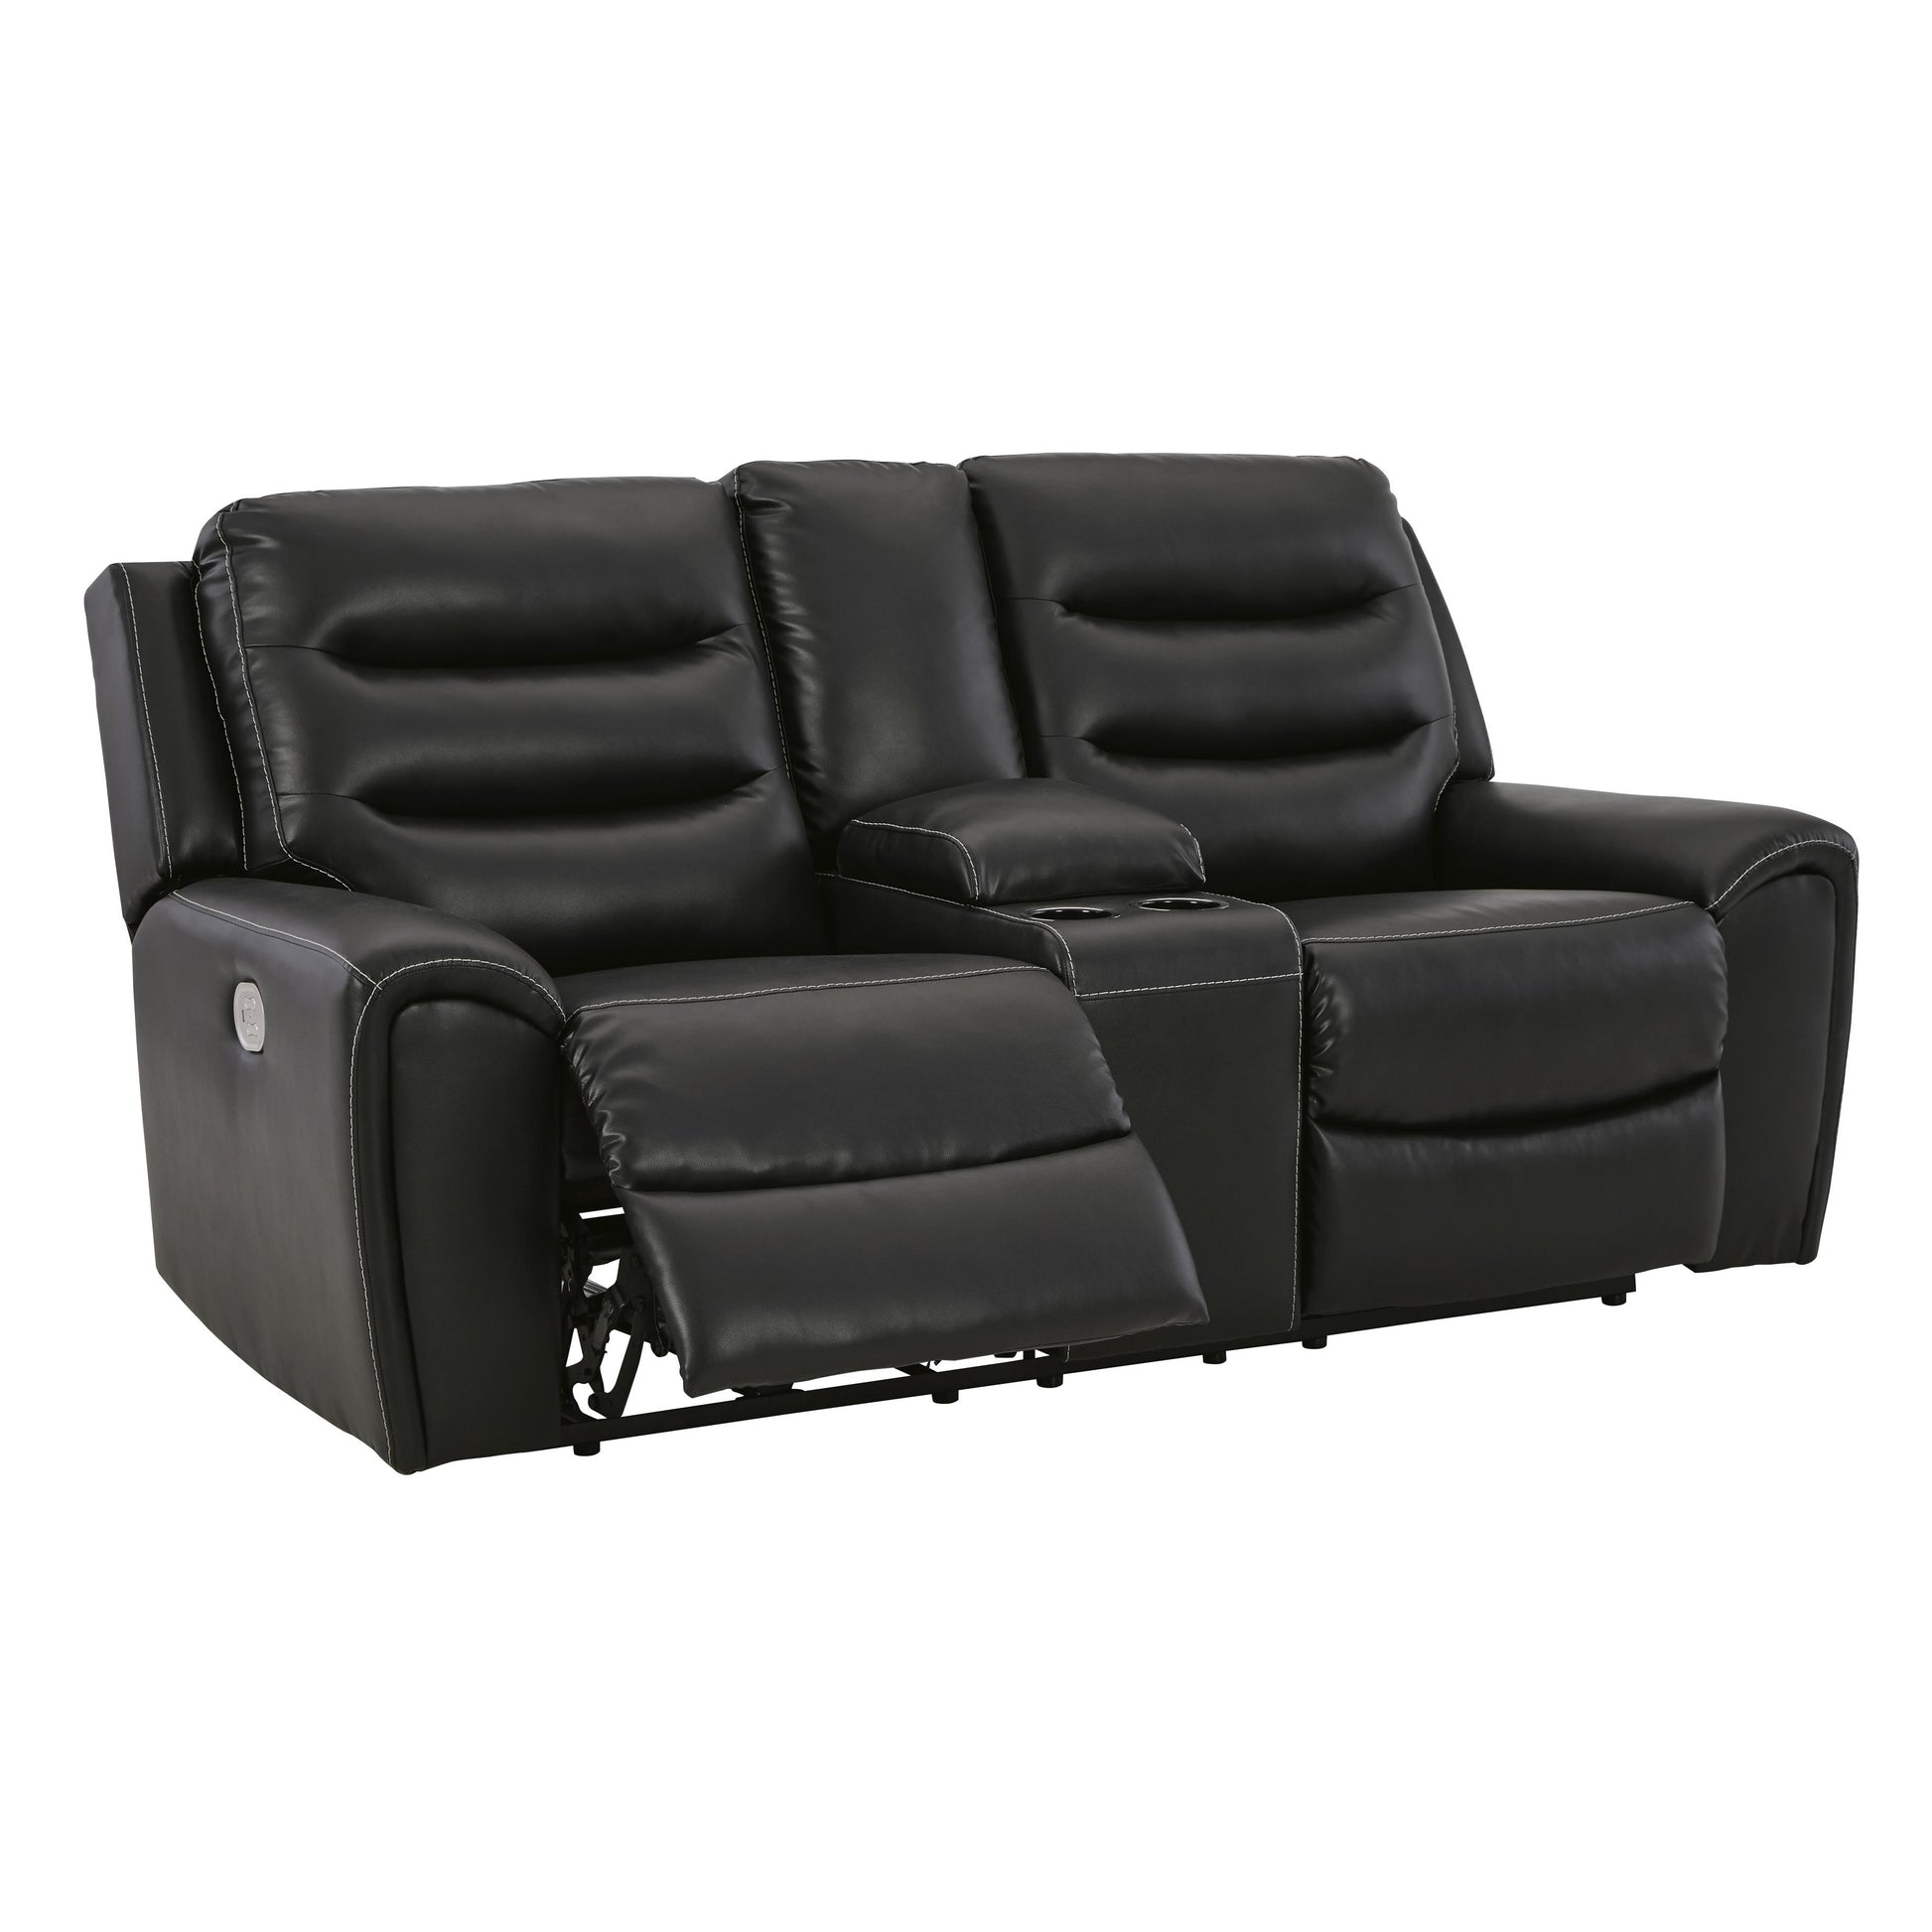 Signature Design by Ashley Warlin Power Reclining Leather Look Loveseat 6110518 IMAGE 2